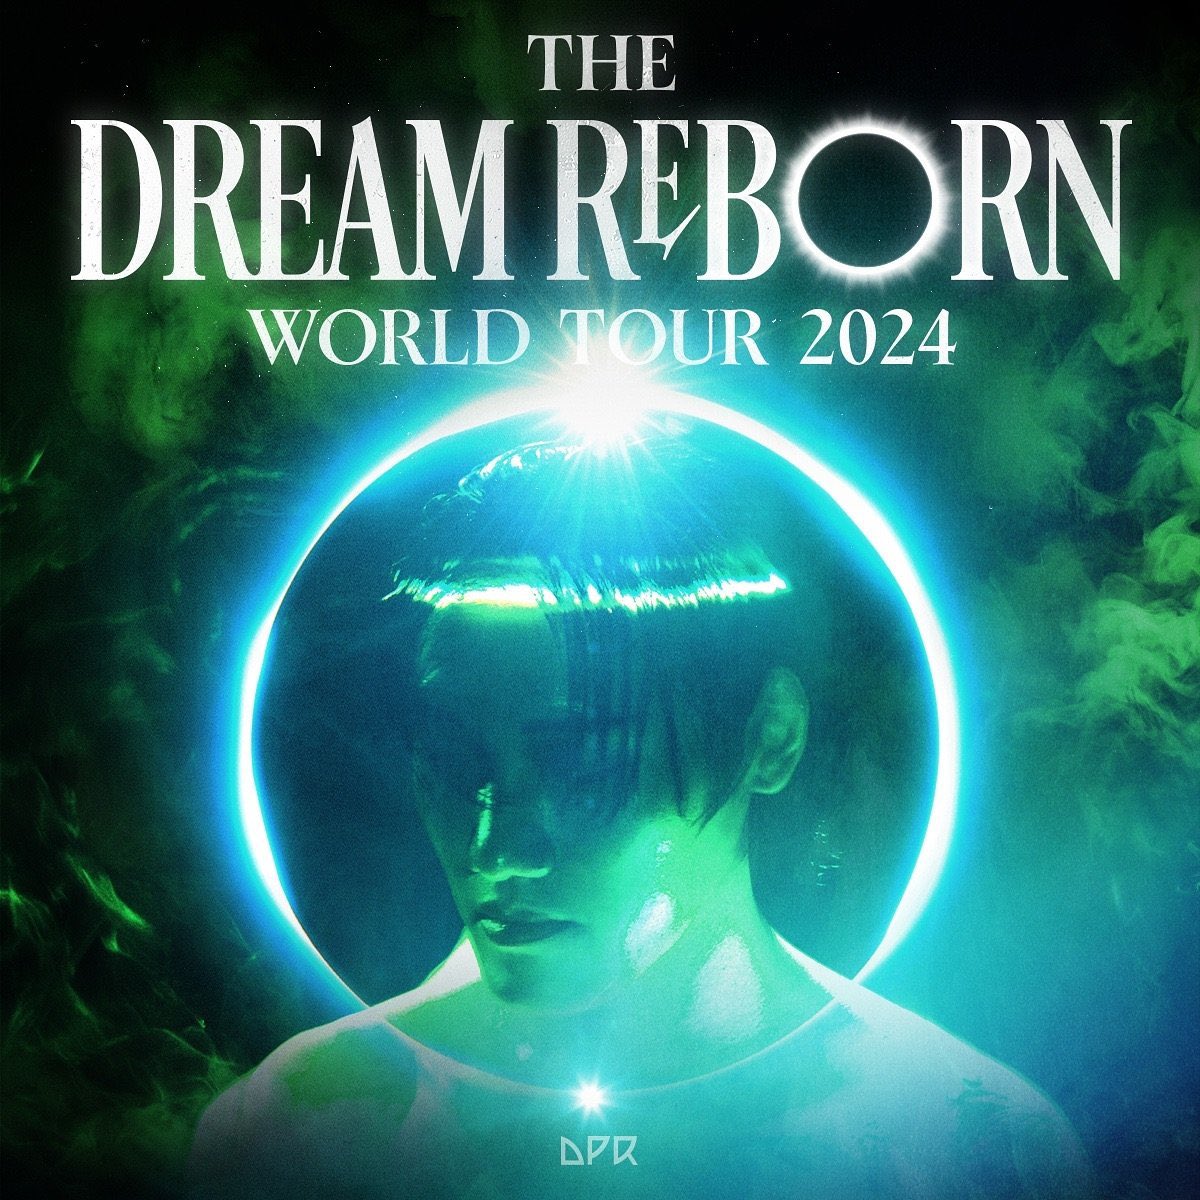 THE DREAM REBORN TOUR 2024 is coming❤️‍🔥❤️‍🔥
Waiting for the date and country🫢

+아니 근데 포스터 규격이 왜 다른거야😂
#DPR #DPRIAN #DPRARTIC #DPRCREAM #THEDREAMREBORNTOUR